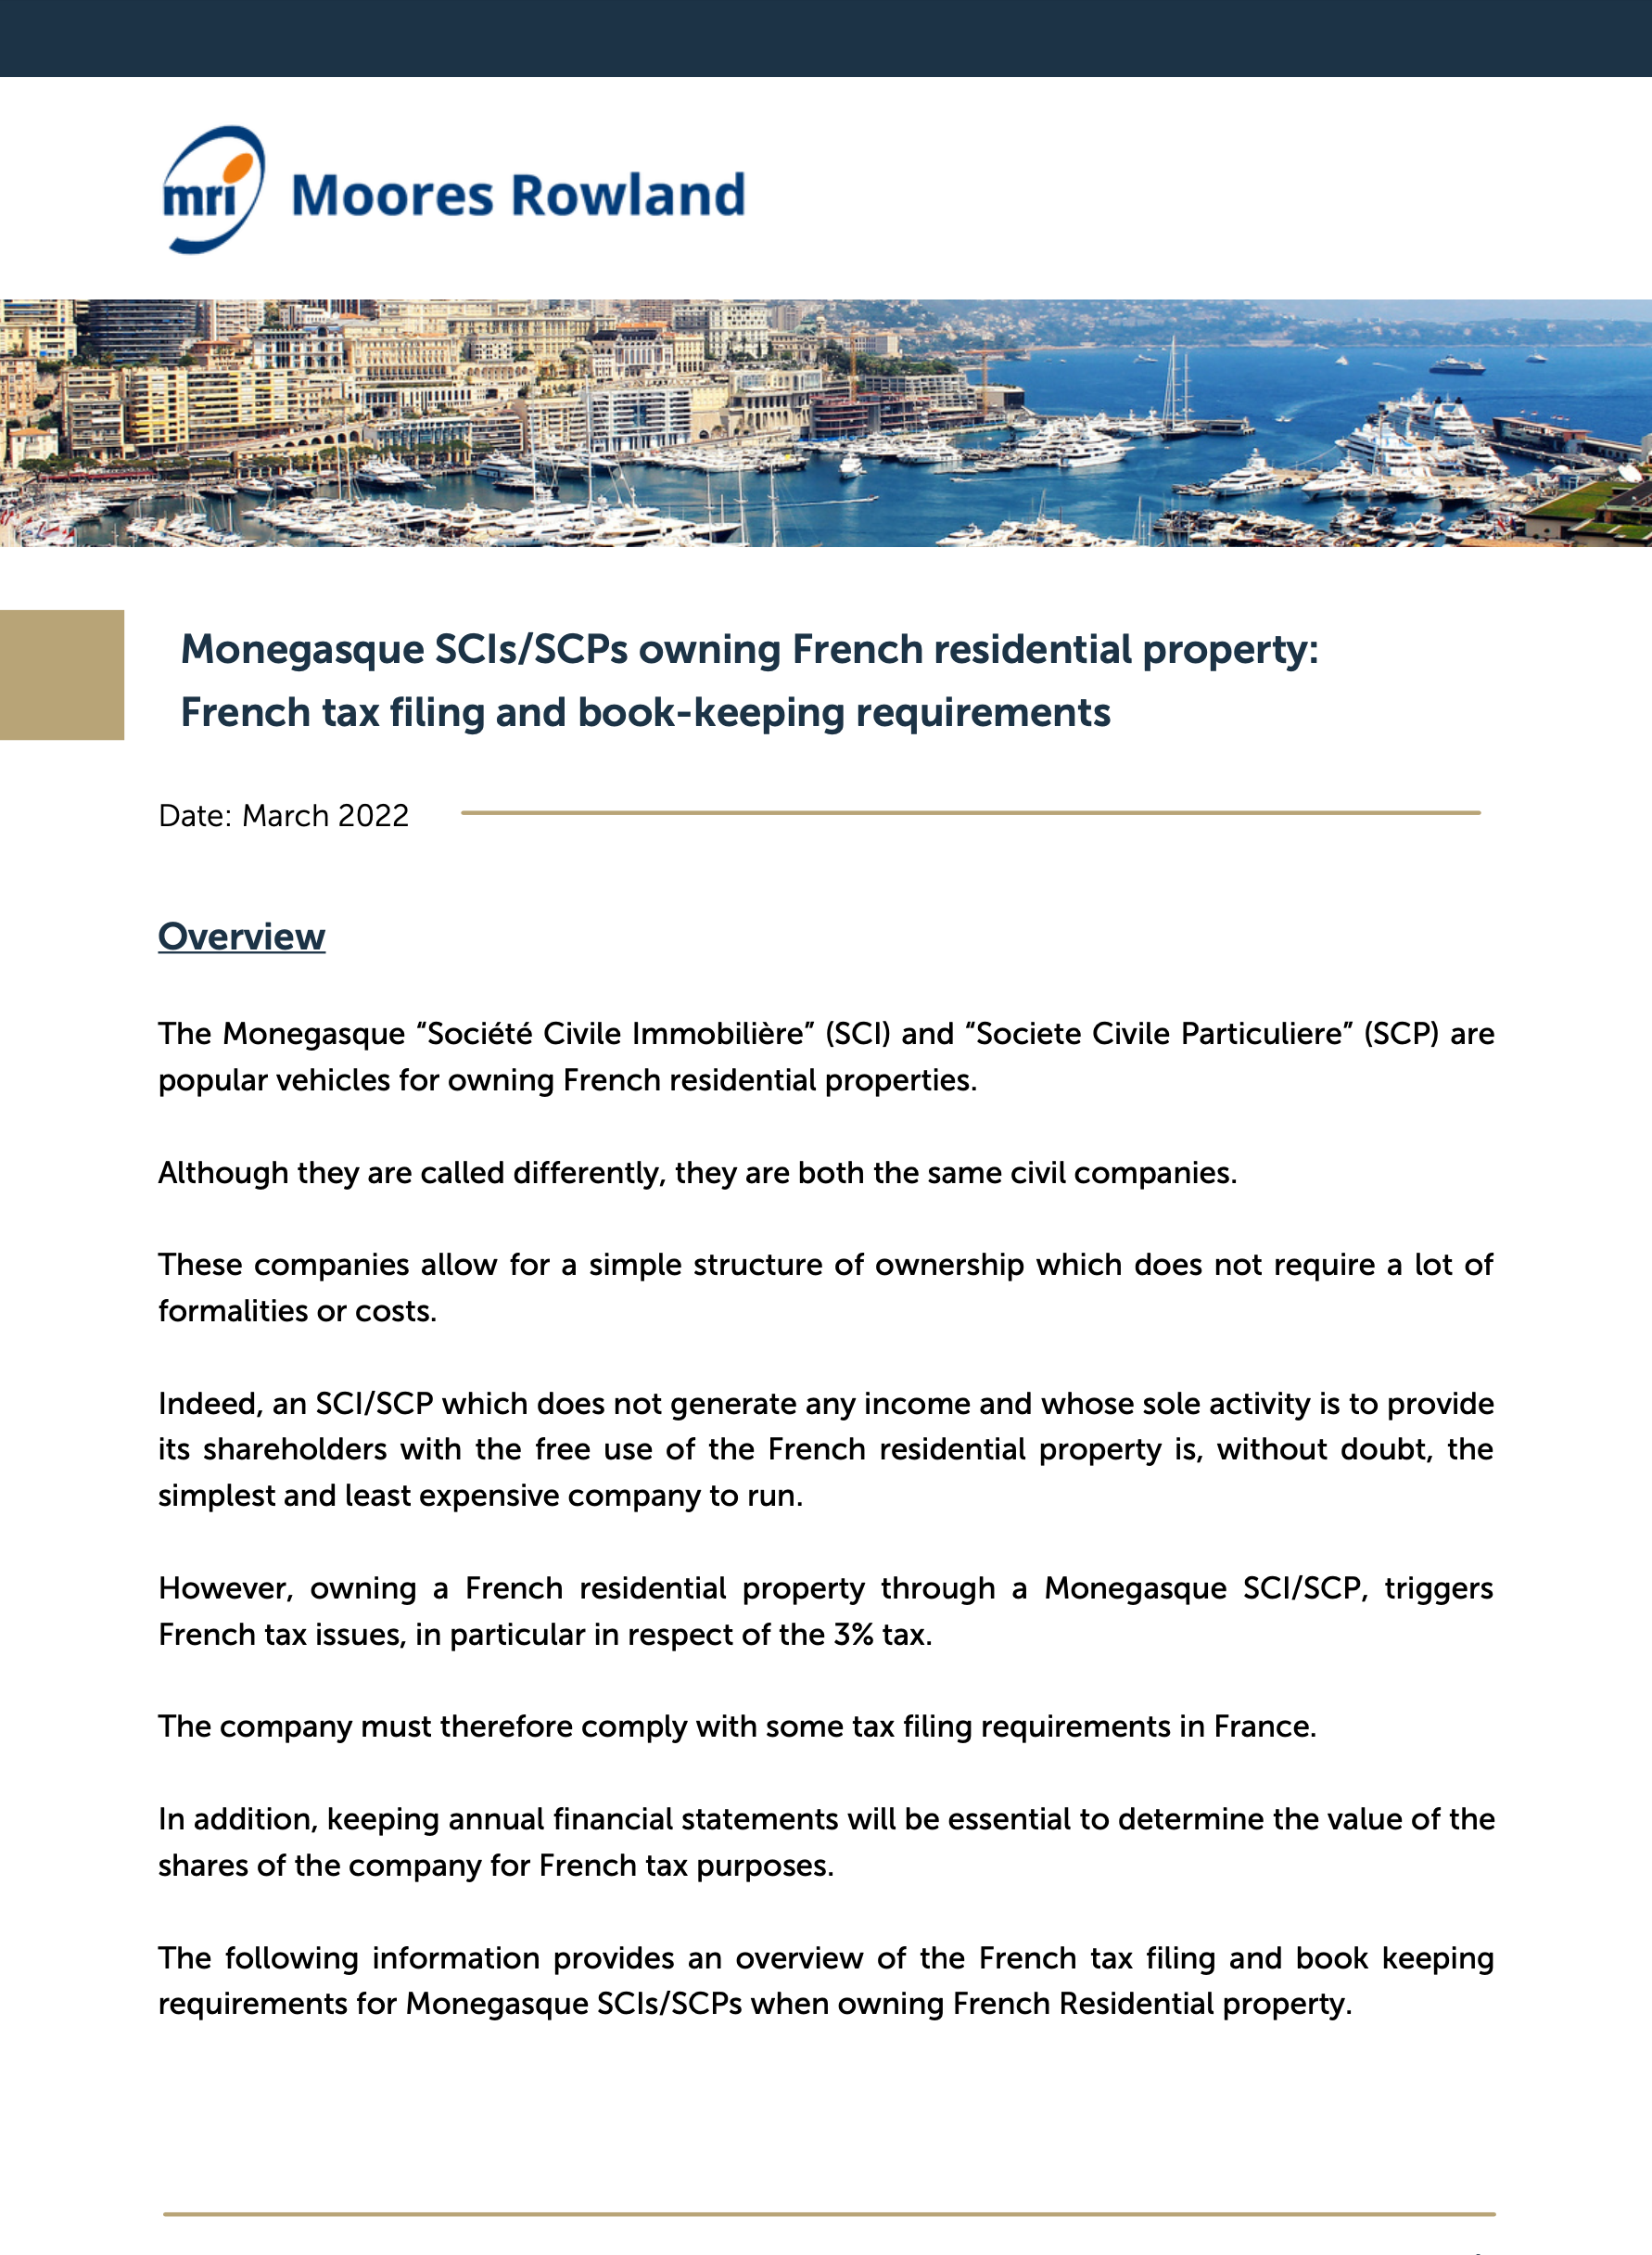 MONEGASQUE SCIS/SCPS OWNING FRENCH RESIDENTIAL PROPERTY: FRENCH TAX FILING REQUIREMENTS AND BOOK-KEEPINGS